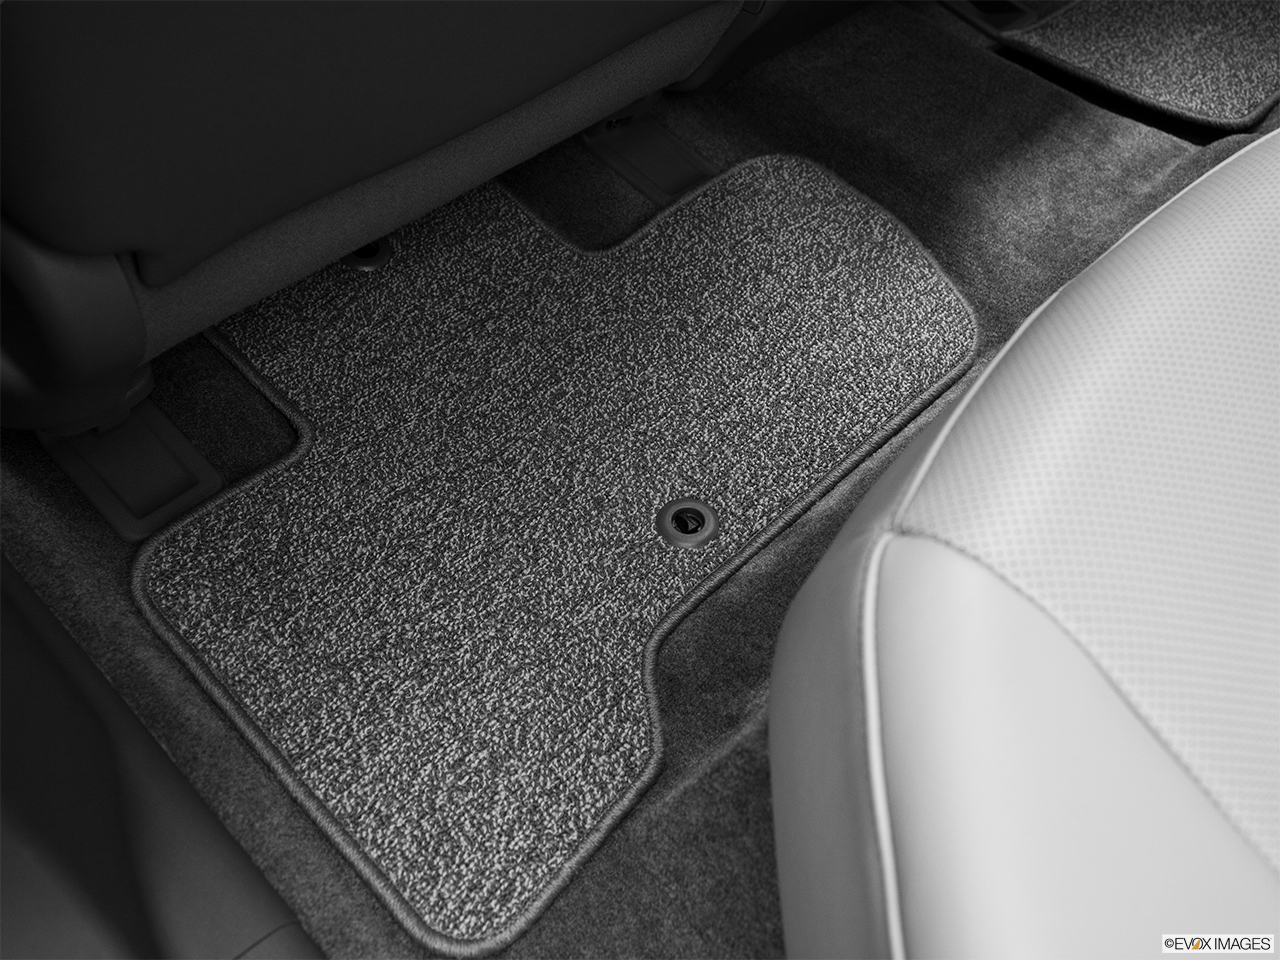 2011 Acura ZDX ZDX Advance Rear driver's side floor mat. Mid-seat level from outside looking in. 